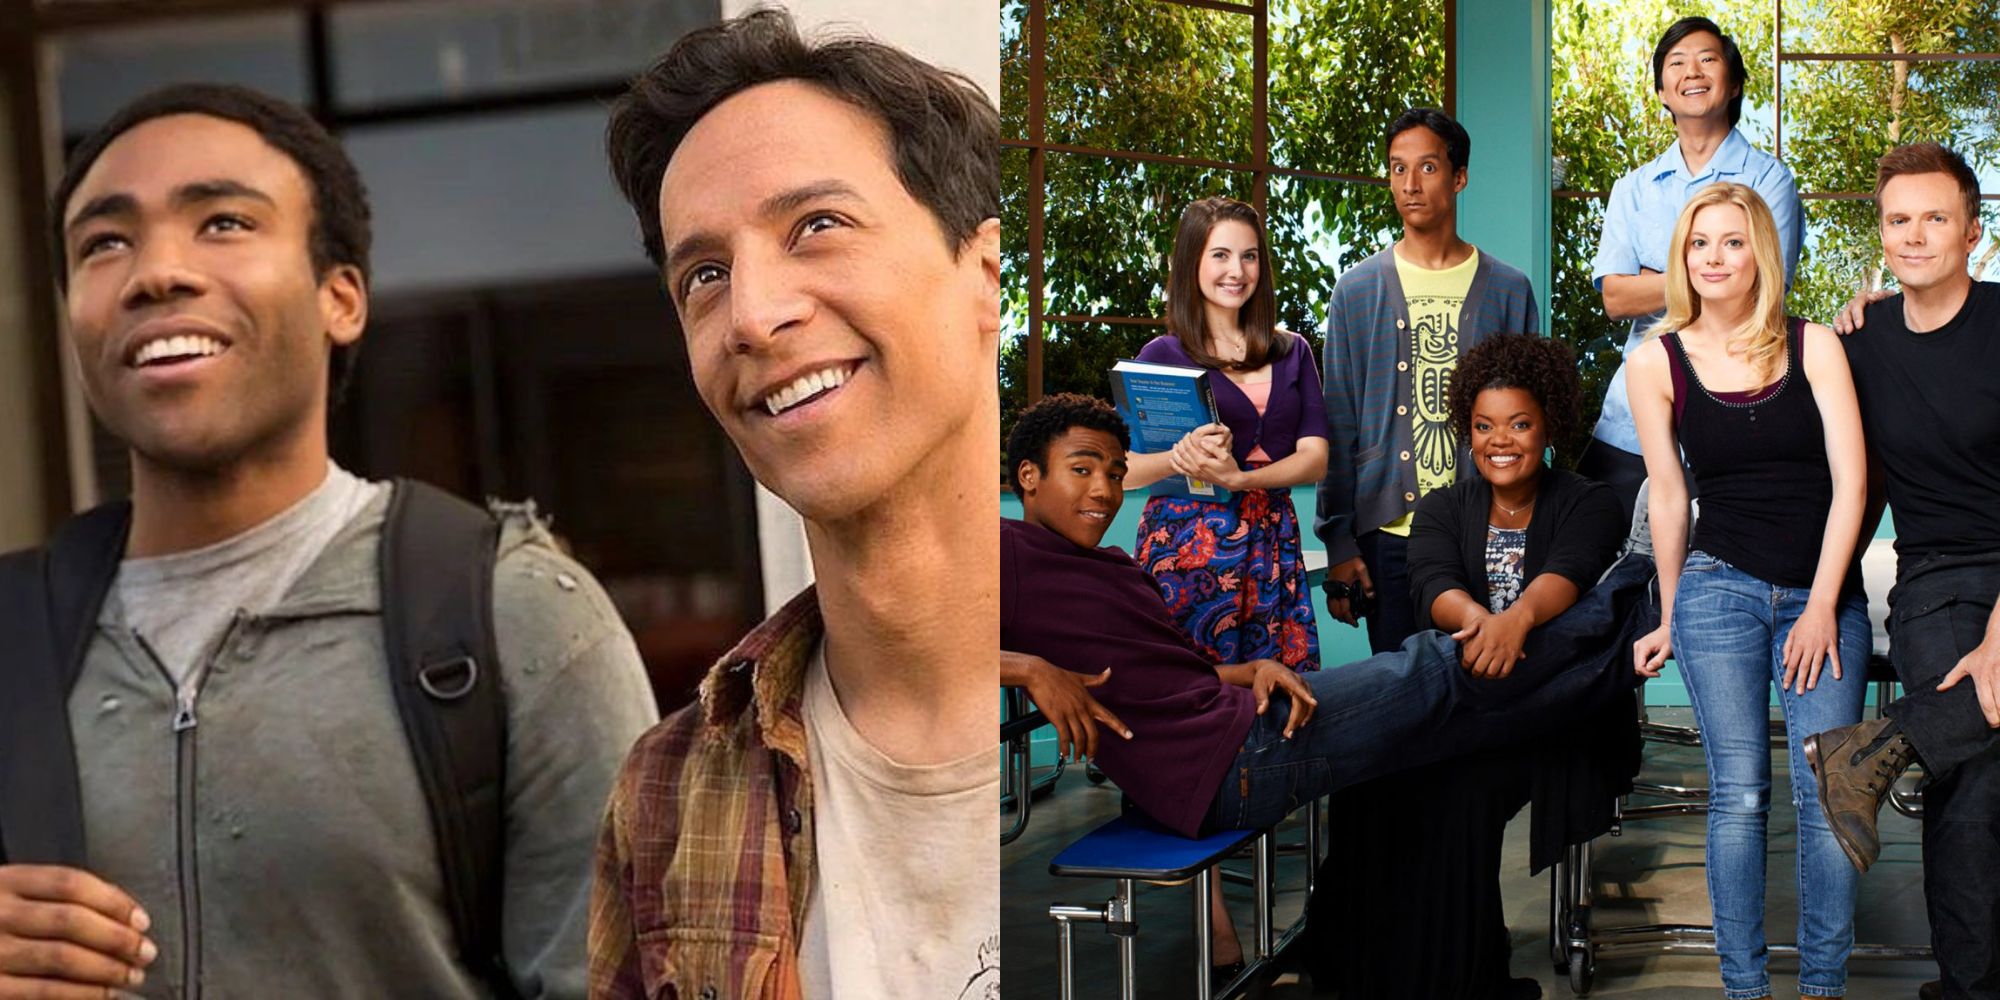 Two images of the cast of Community